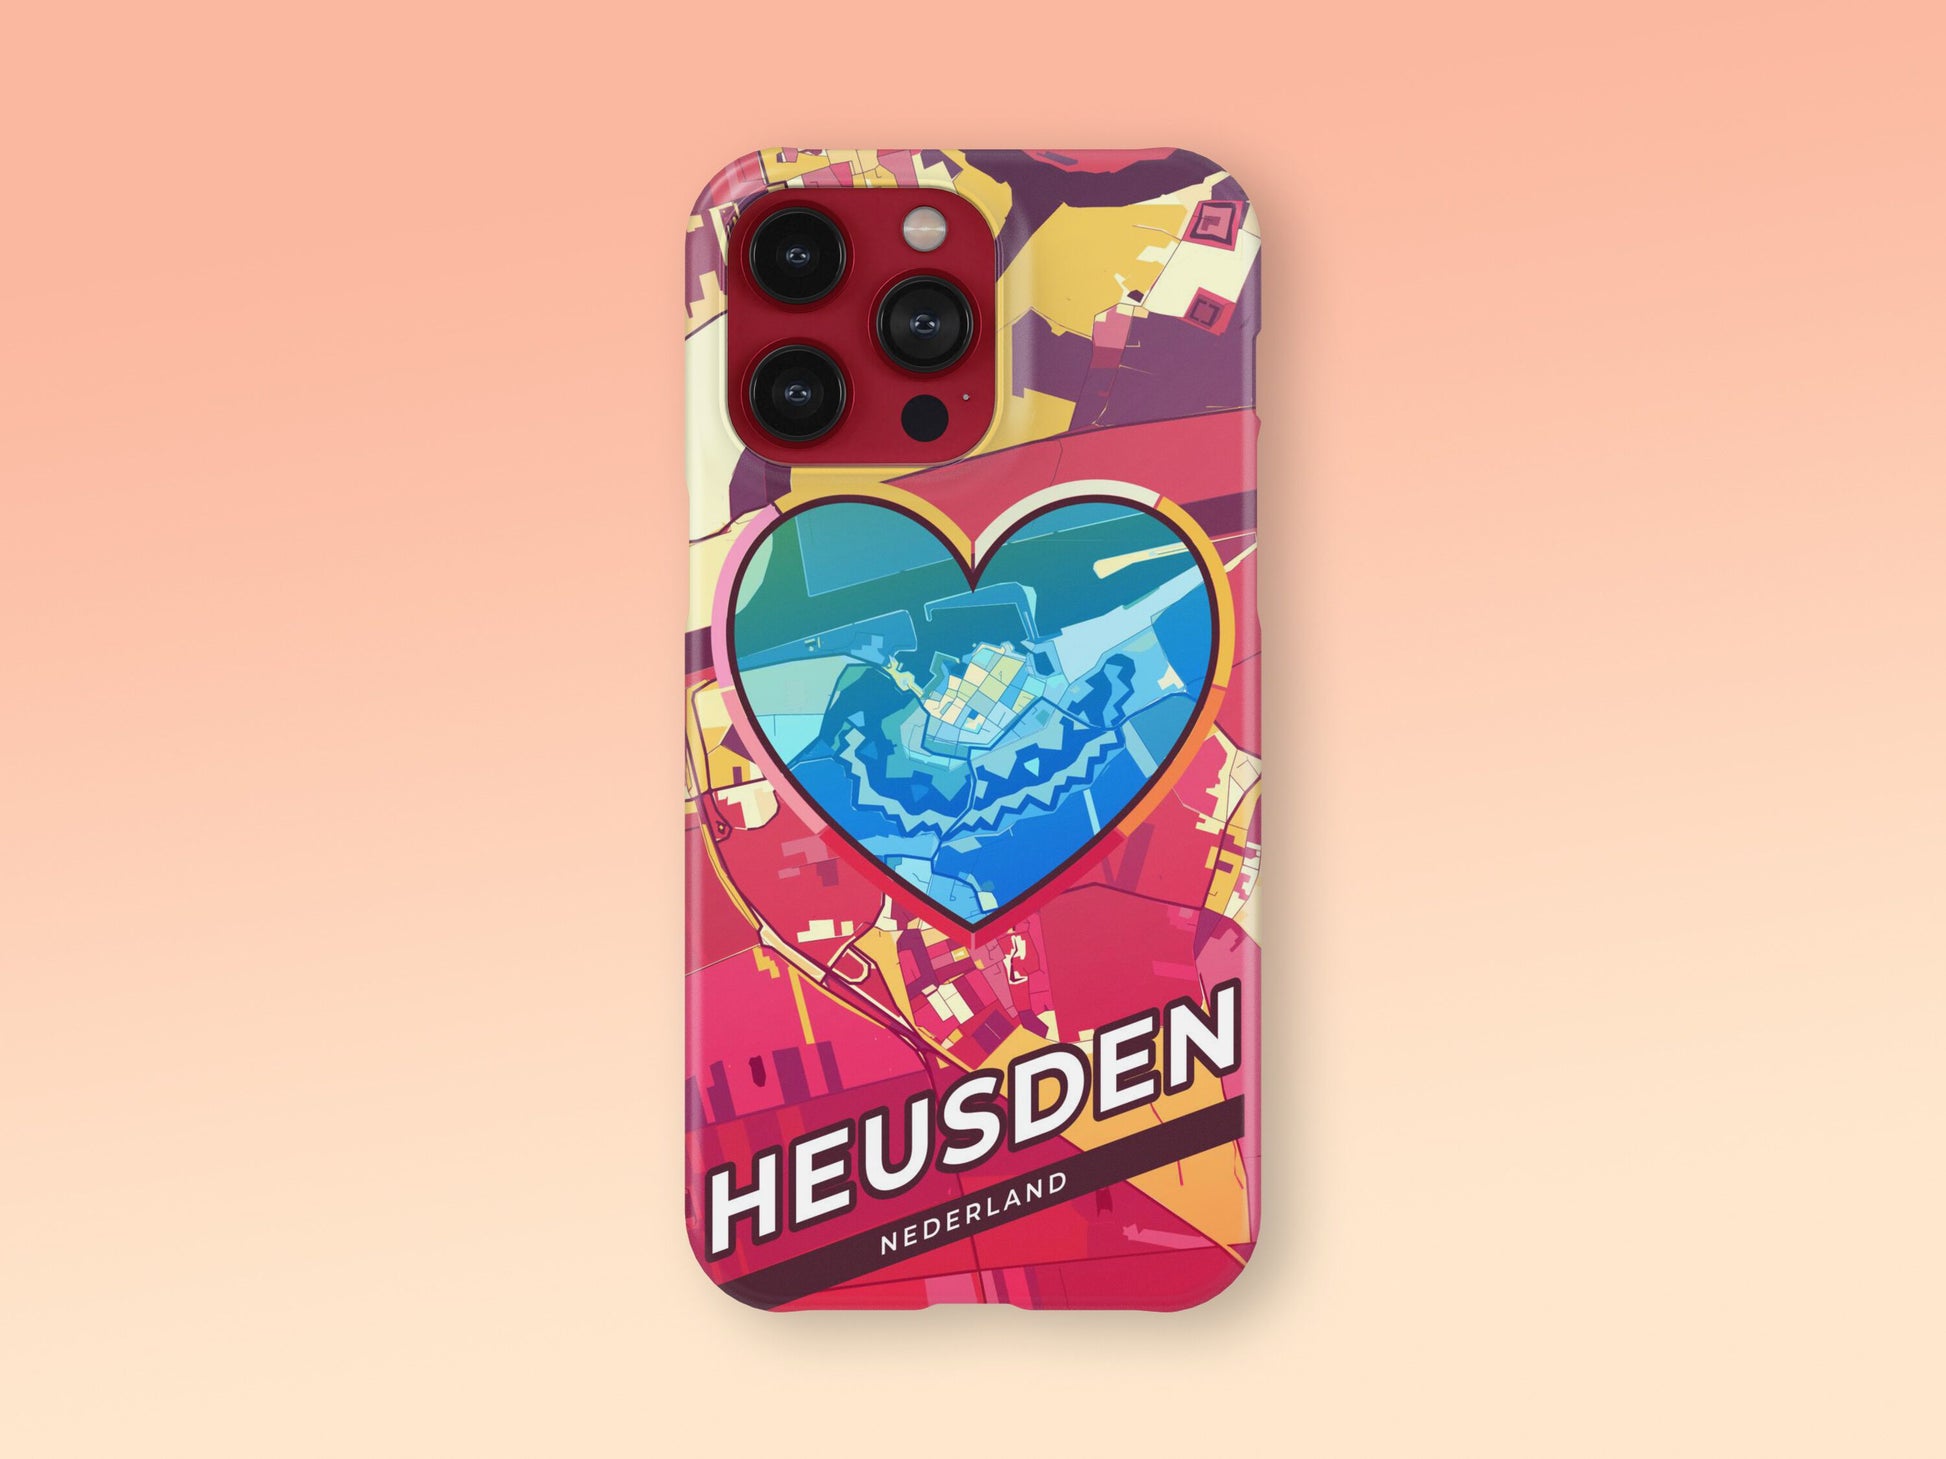 Heusden Netherlands slim phone case with colorful icon. Birthday, wedding or housewarming gift. Couple match cases. 2